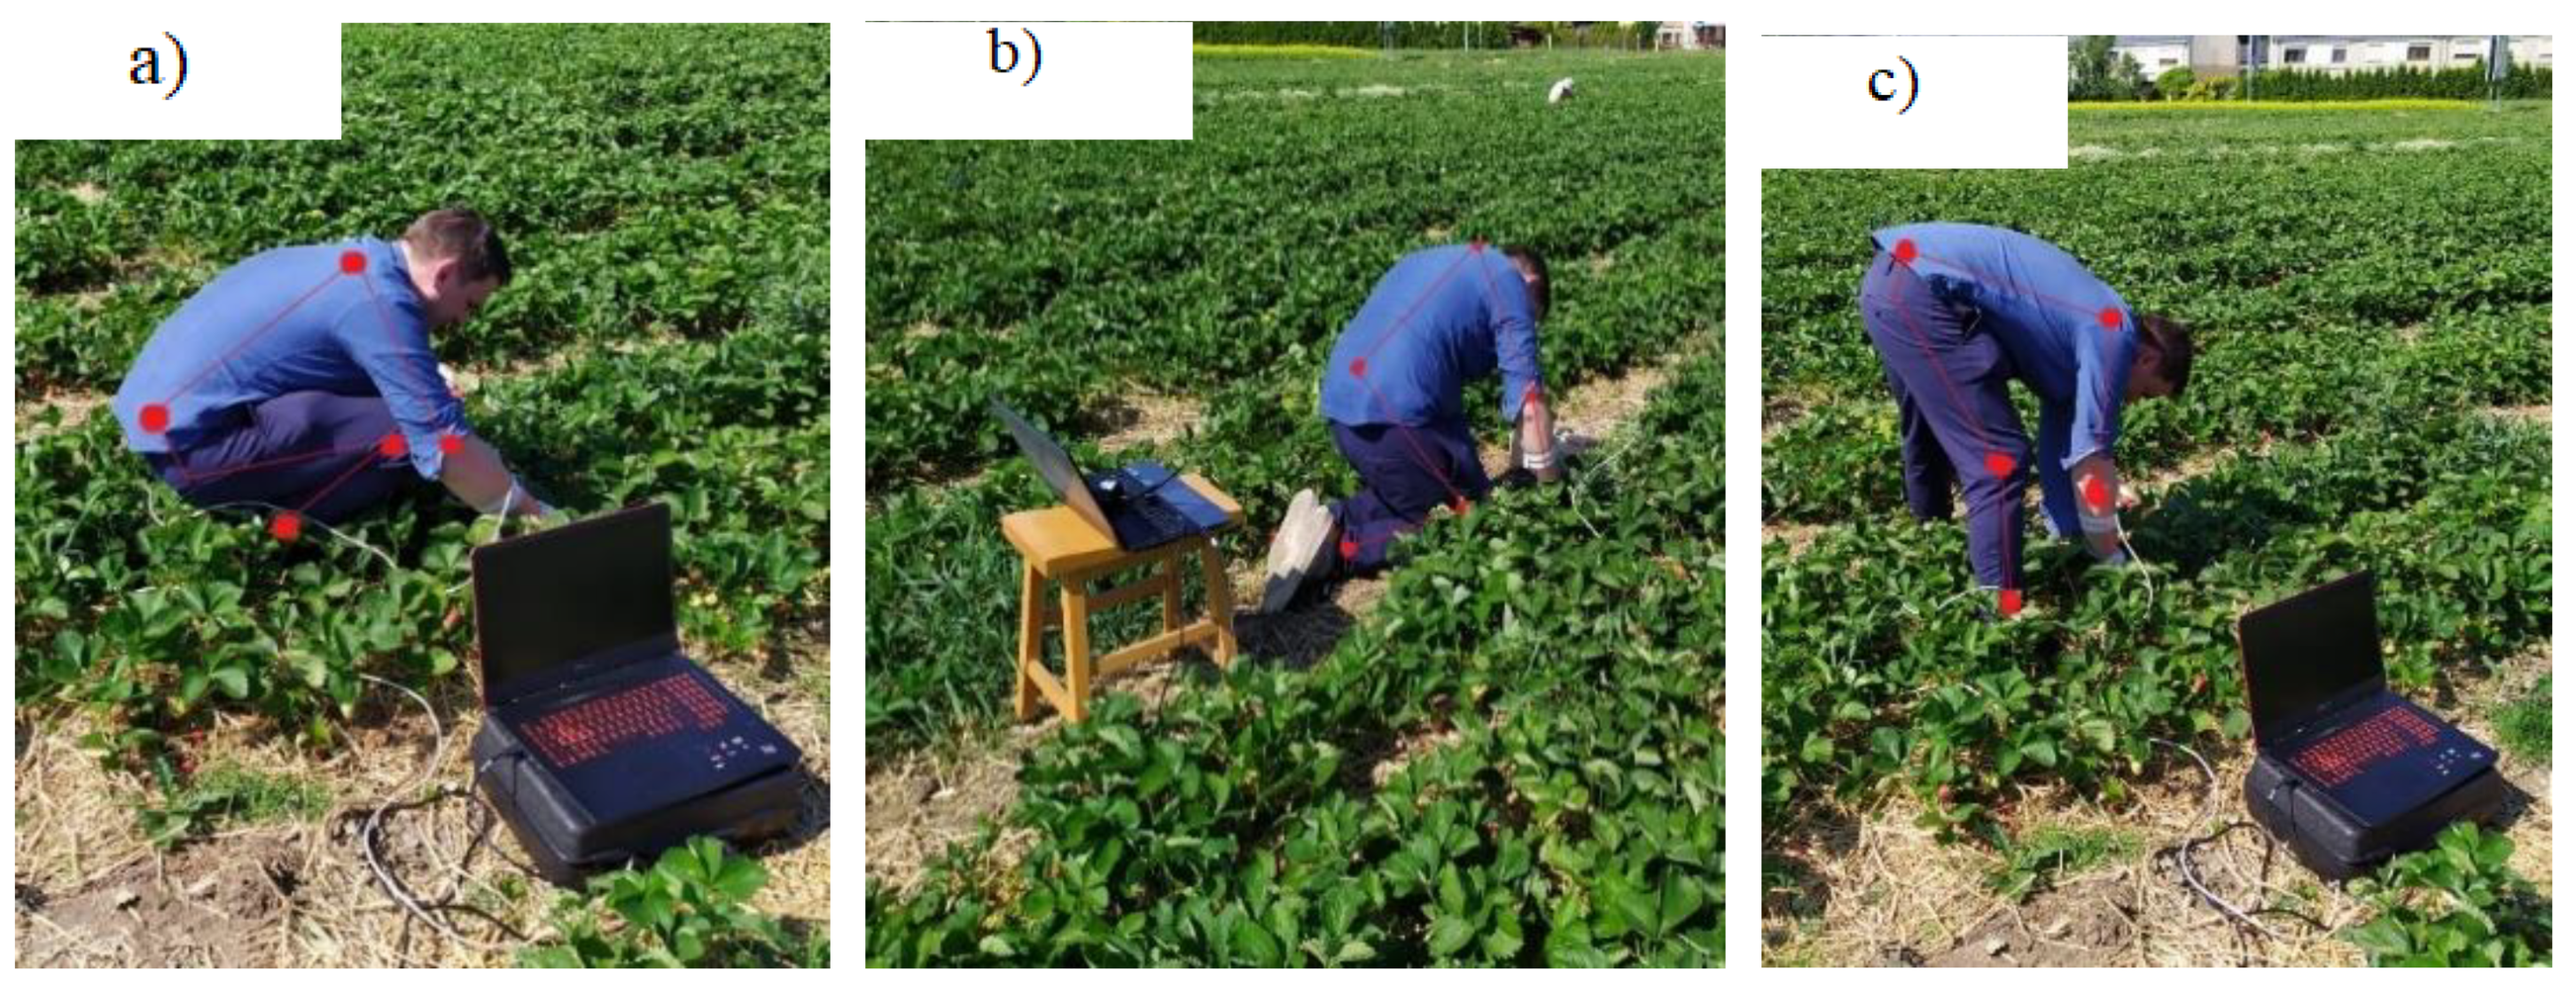 Applied Sciences | Free Full-Text | Evaluation of Picker Discomfort and Its  Impact on Maintaining Strawberry Picking Quality